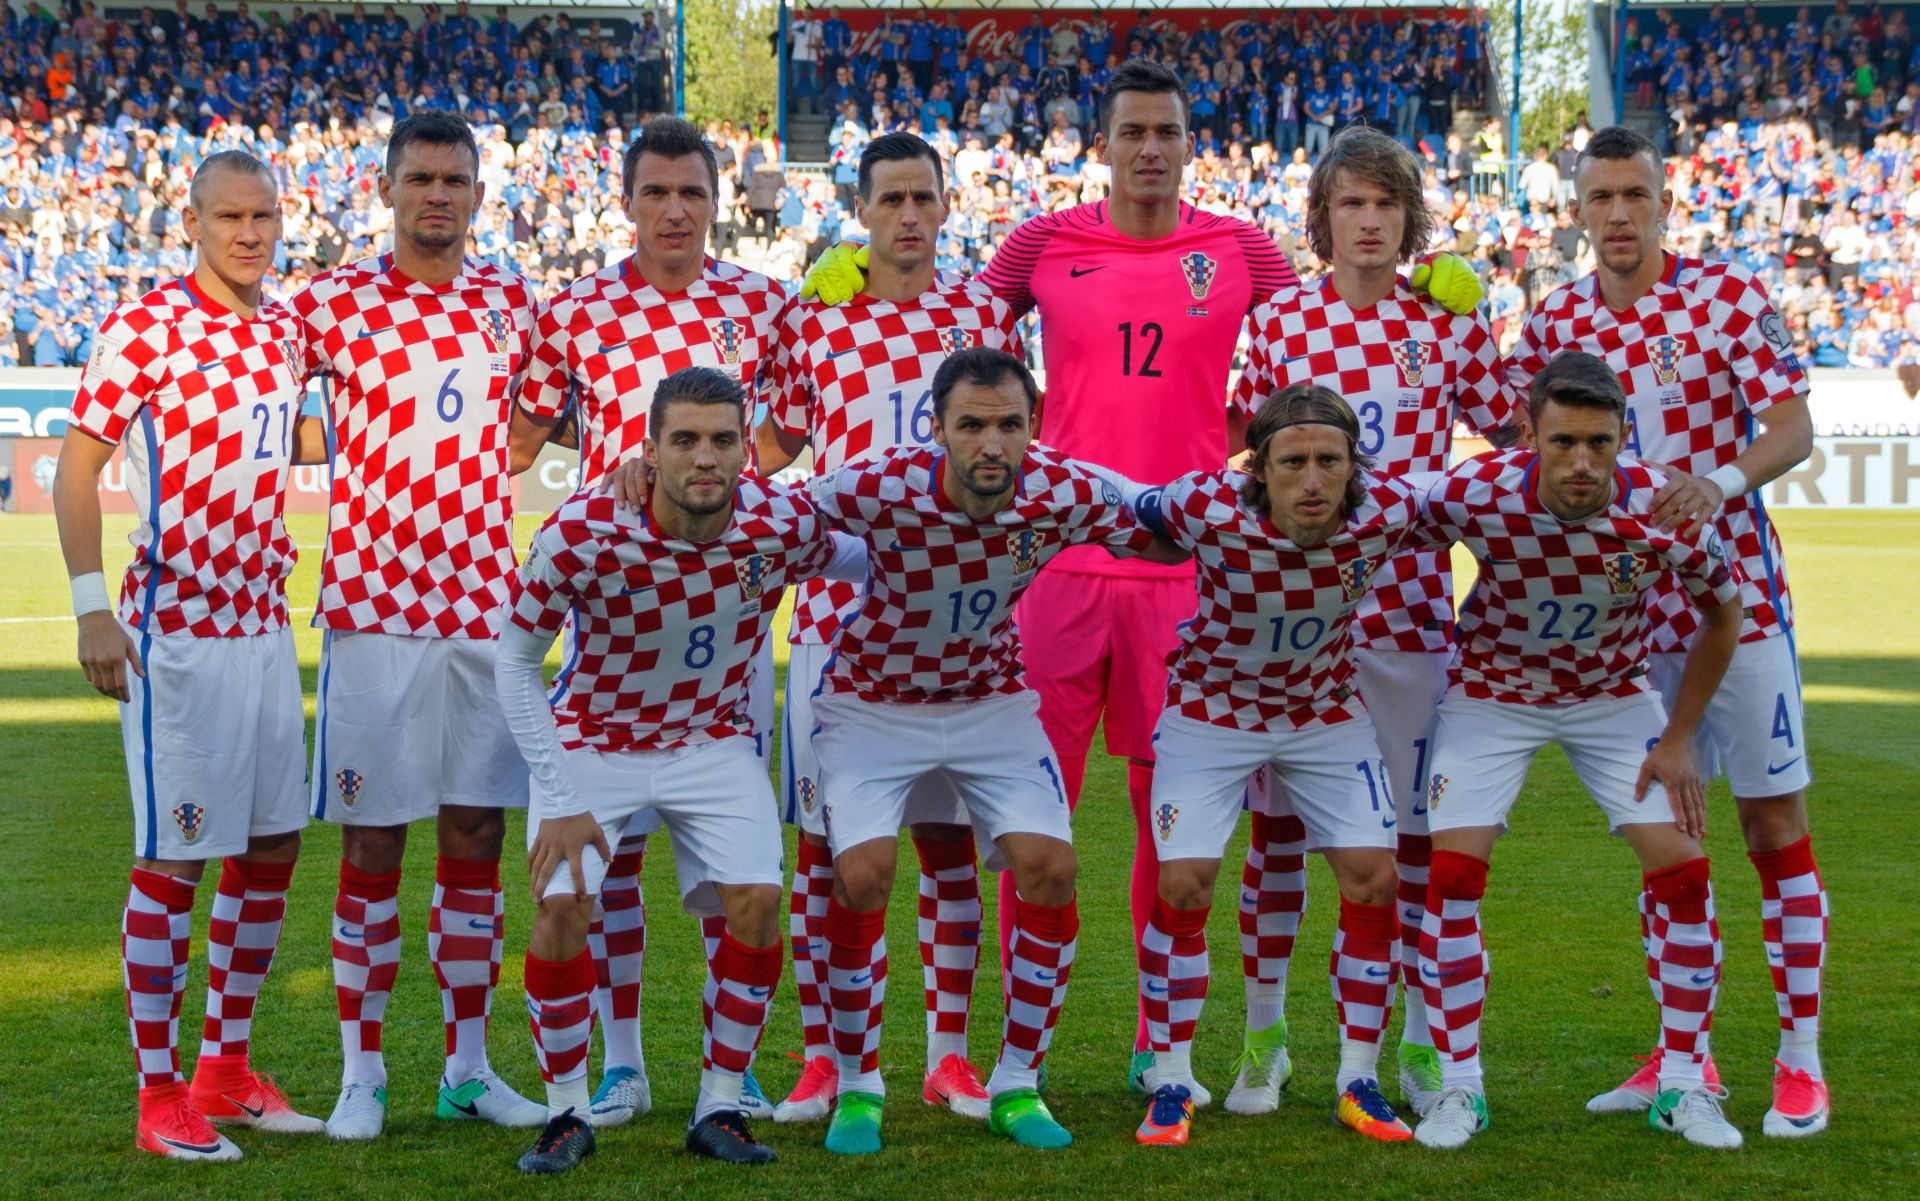 epa06023245 Croatia's starting eleven pose for a picture before the  the FIFA World Cup 2018 qualifying soccer match between Iceland and Croatia in Reykjavik, Iceland, 11 June 2017.  EPA/Birgir Thor Hardarson ICELAND OUT